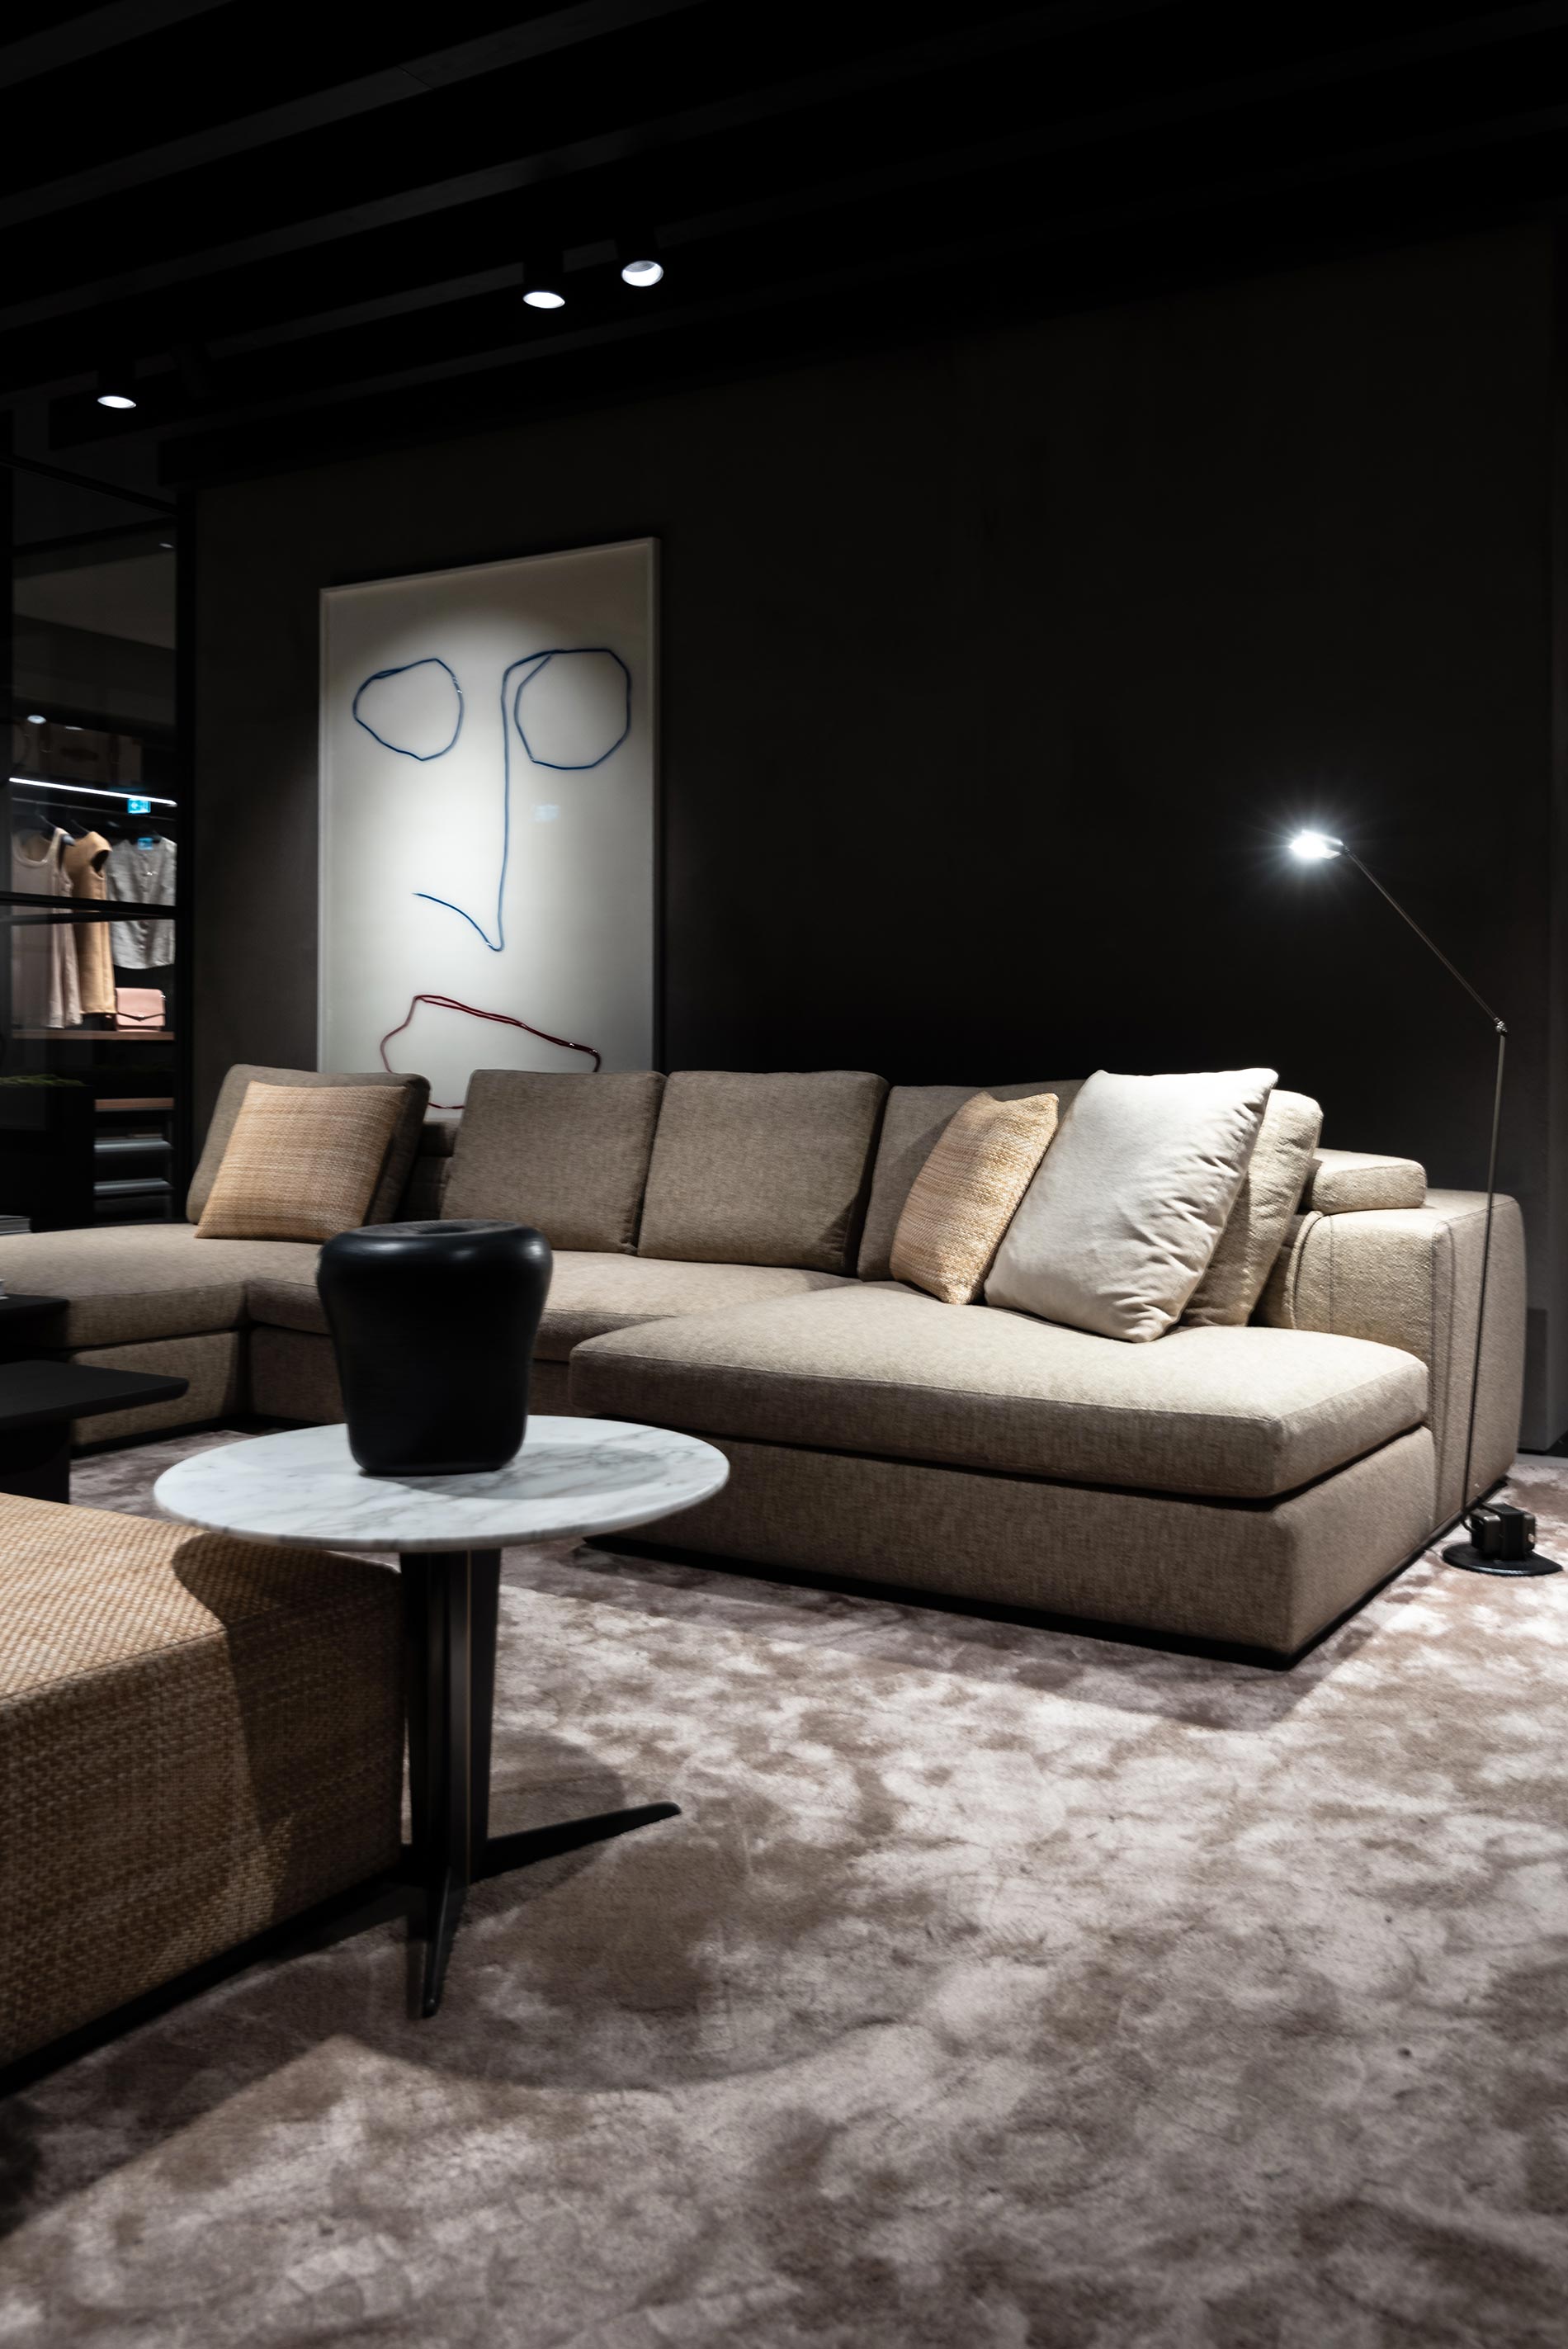 grounded sofas trend 2020 imm cologne 2019